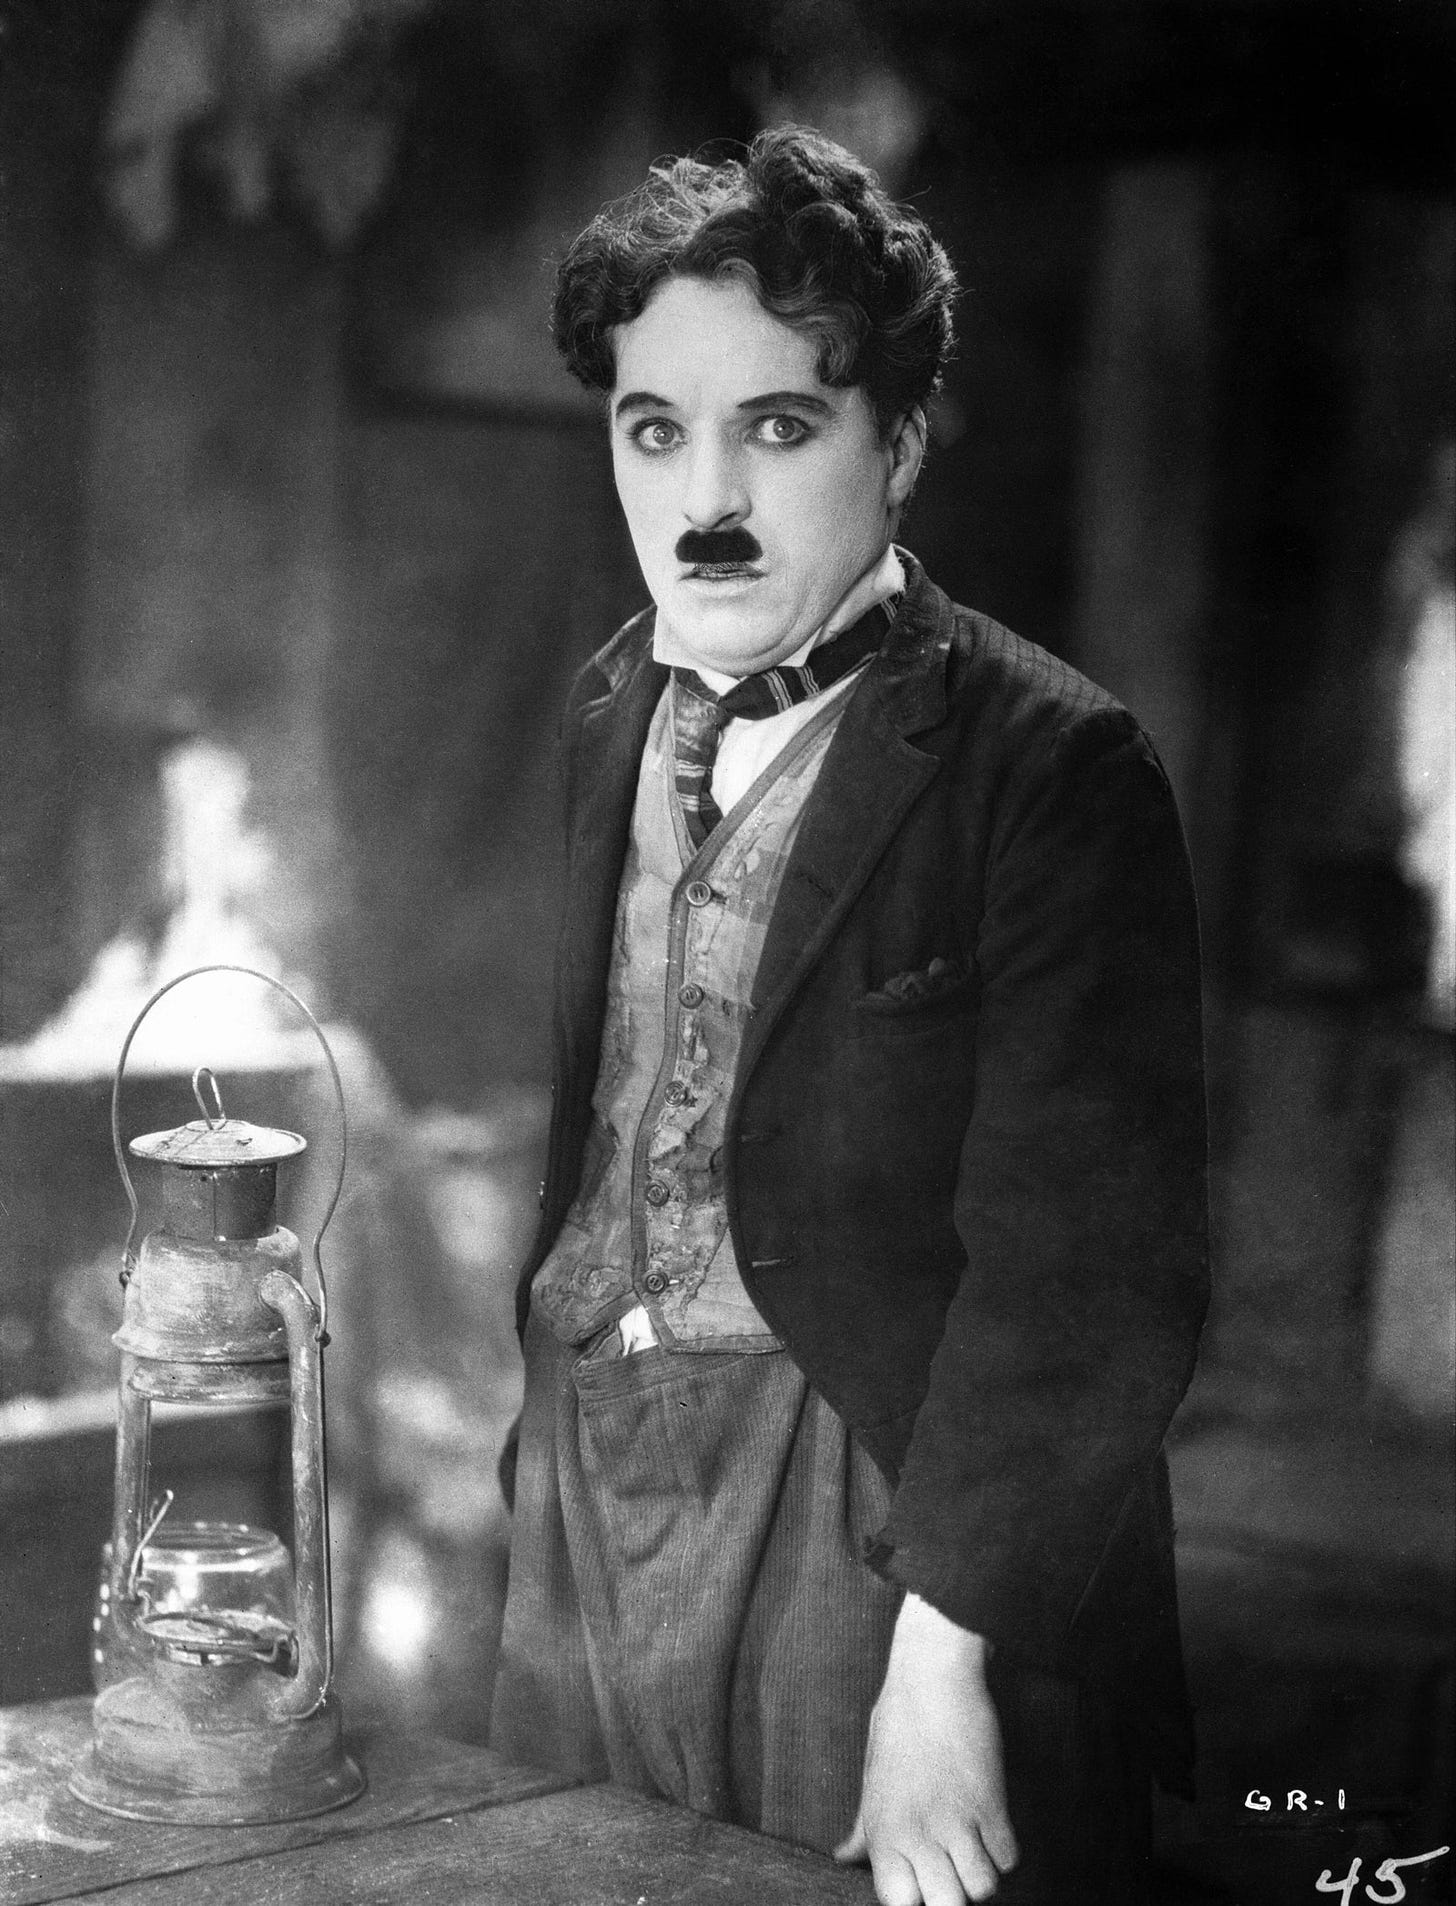 Charlie Chaplin in costume for “The Gold Rush.”